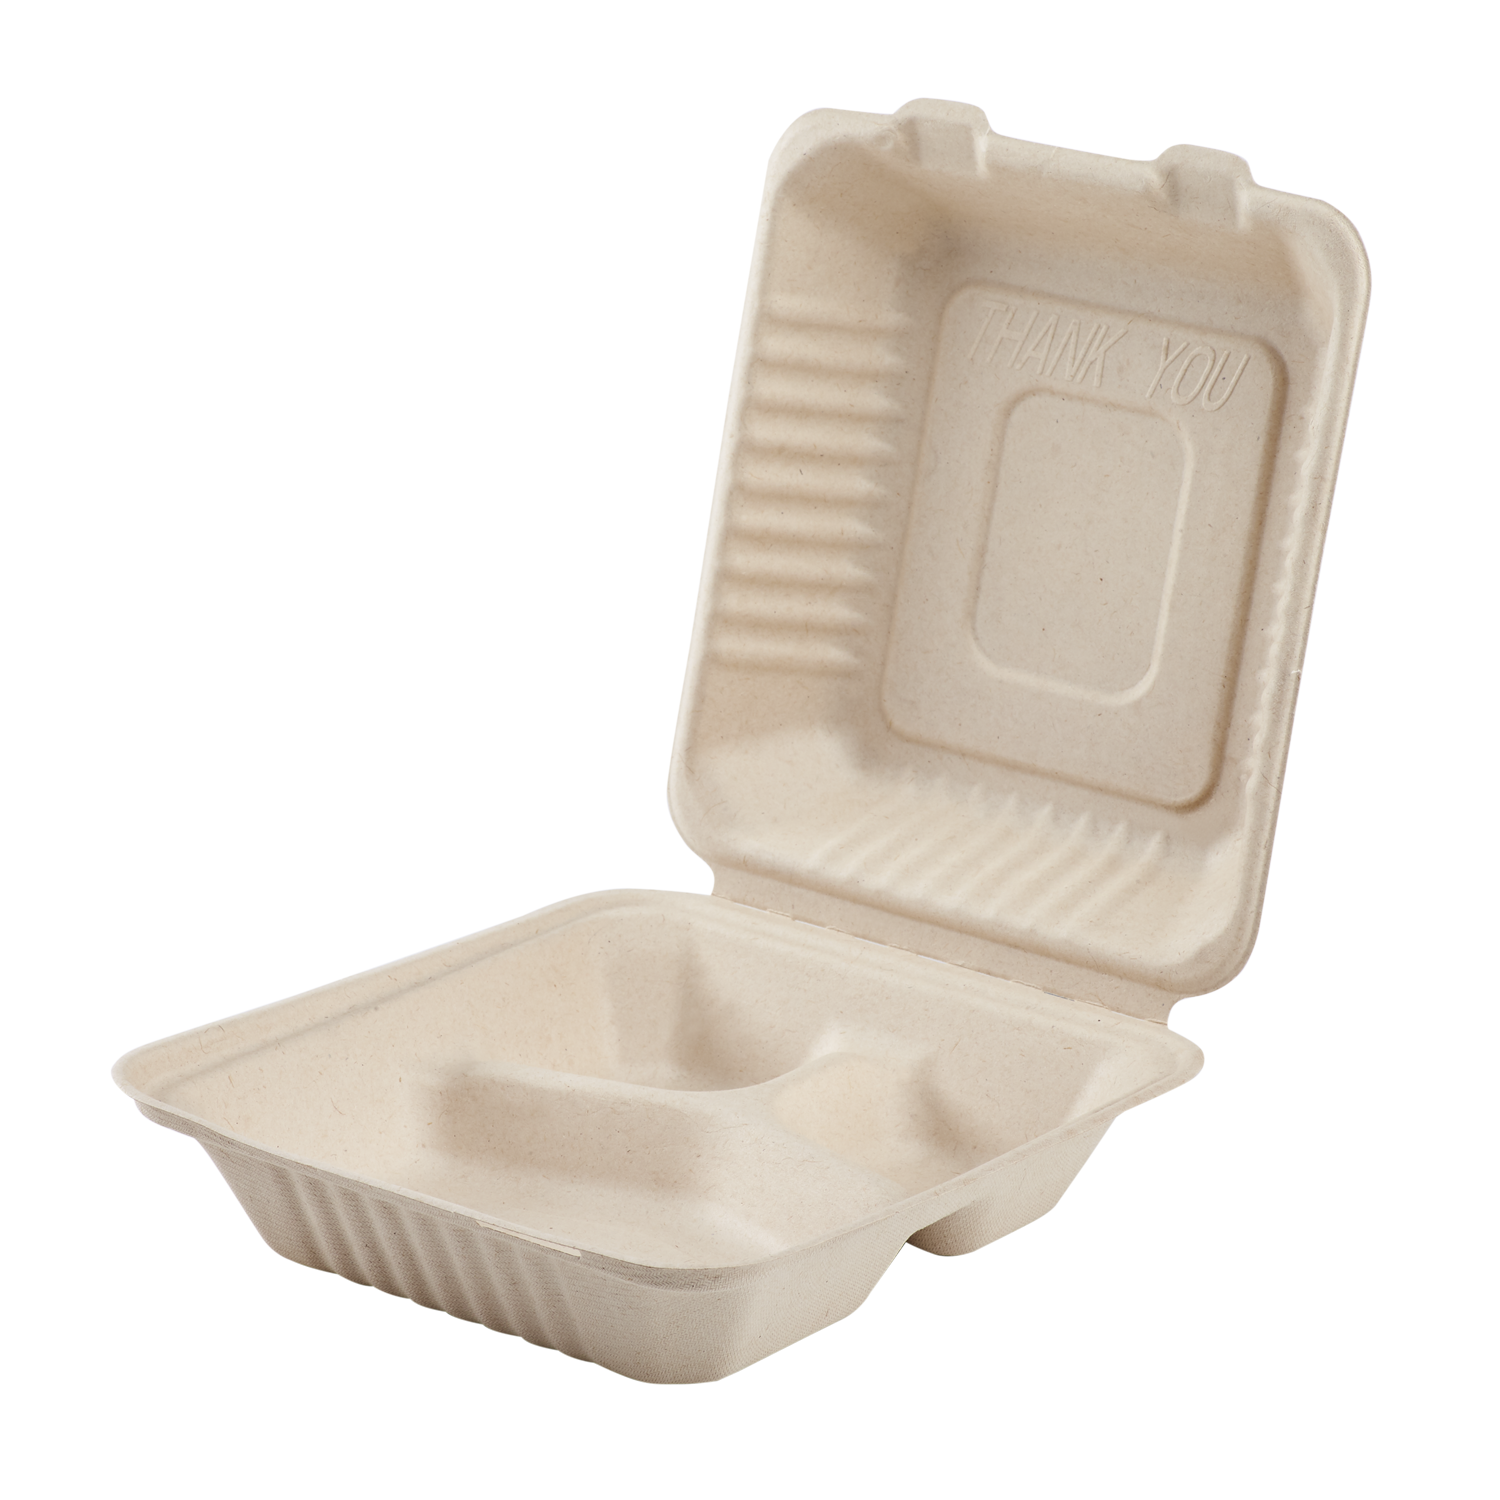 Biodegradable Lunch Box Paper Food Packaging with Compartment